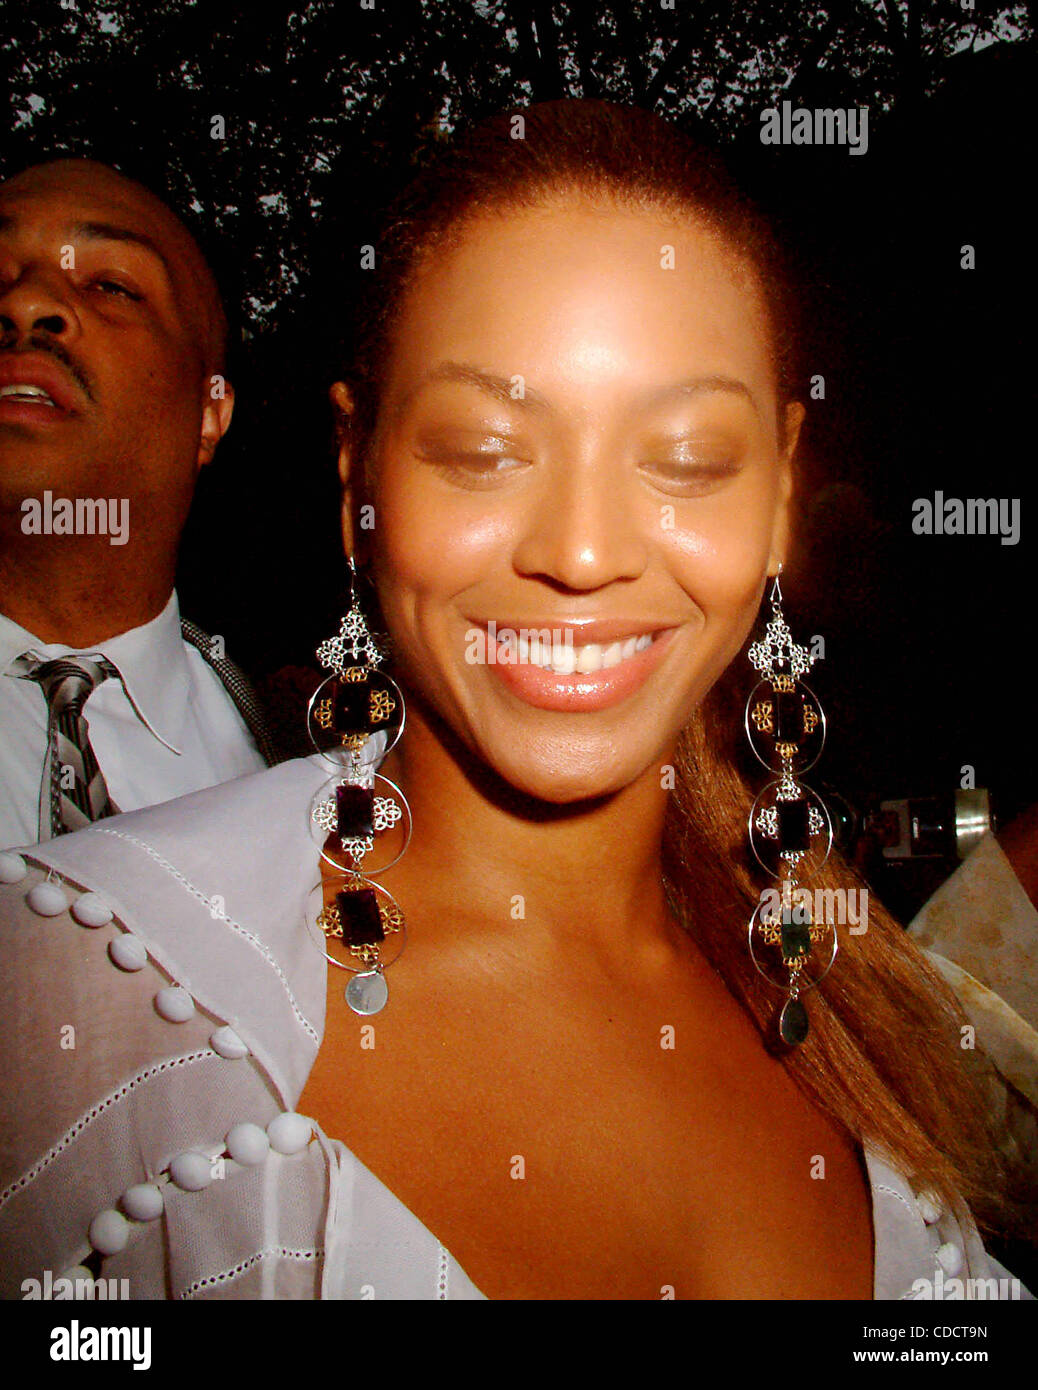 K32794ML.MERCEDES-BENZ FASHION WEEK- CELEBRITY ARRIVALS AT BRYANT PARK IN NEW YORK New York.9/13/2003.  /    2003.BEYONCE KNOWLES(Credit Image: Â© Mitchell Levy/Globe Photos/ZUMAPRESS.com) Stock Photo